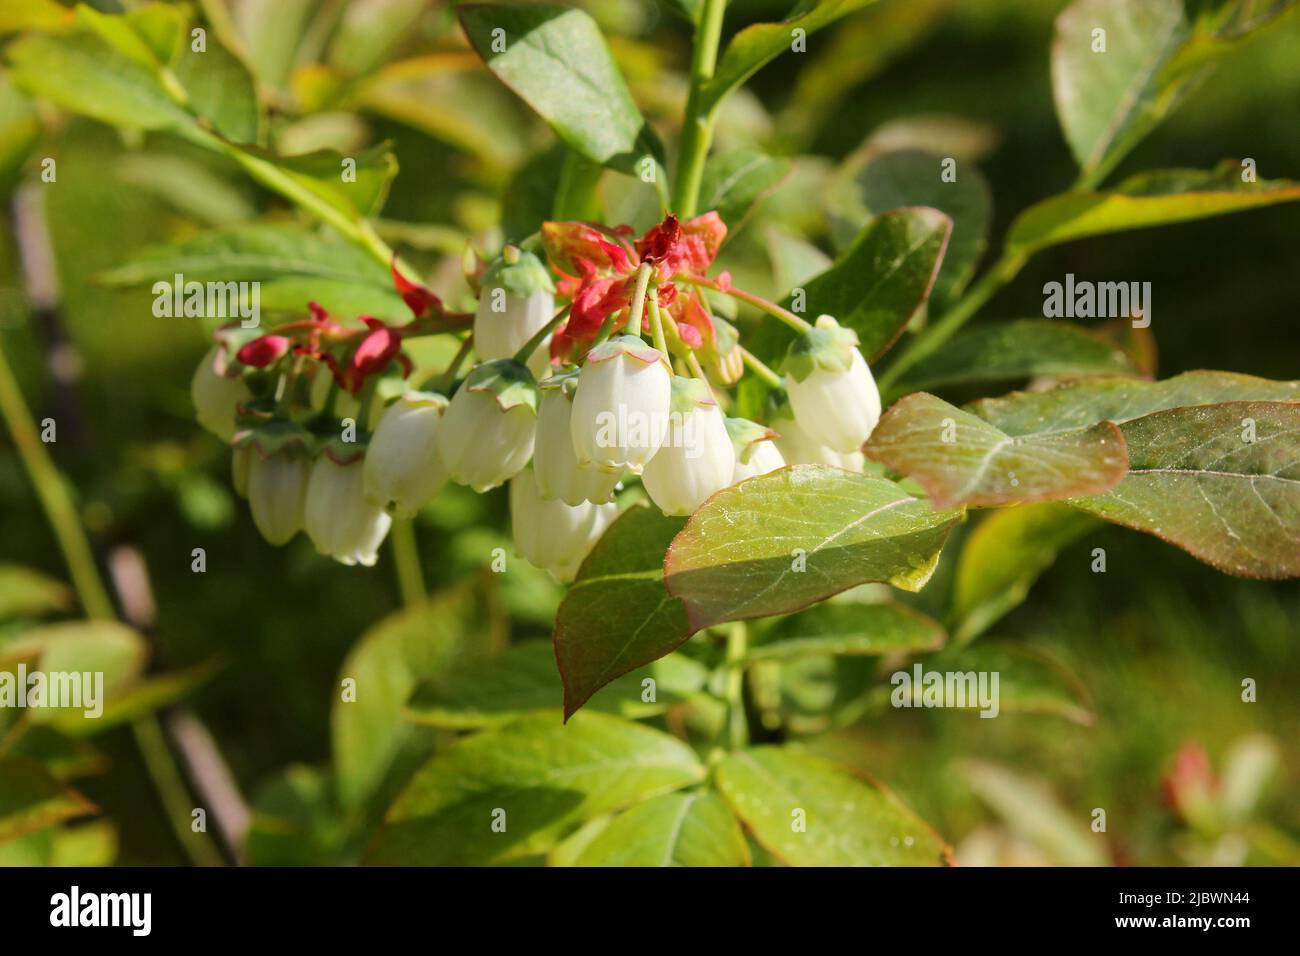 Blueberry (Vaccinium corymbosum) white blossoms and buds on a bush. Blueberry bud twig. Summertime. Close-up. Stock Photo